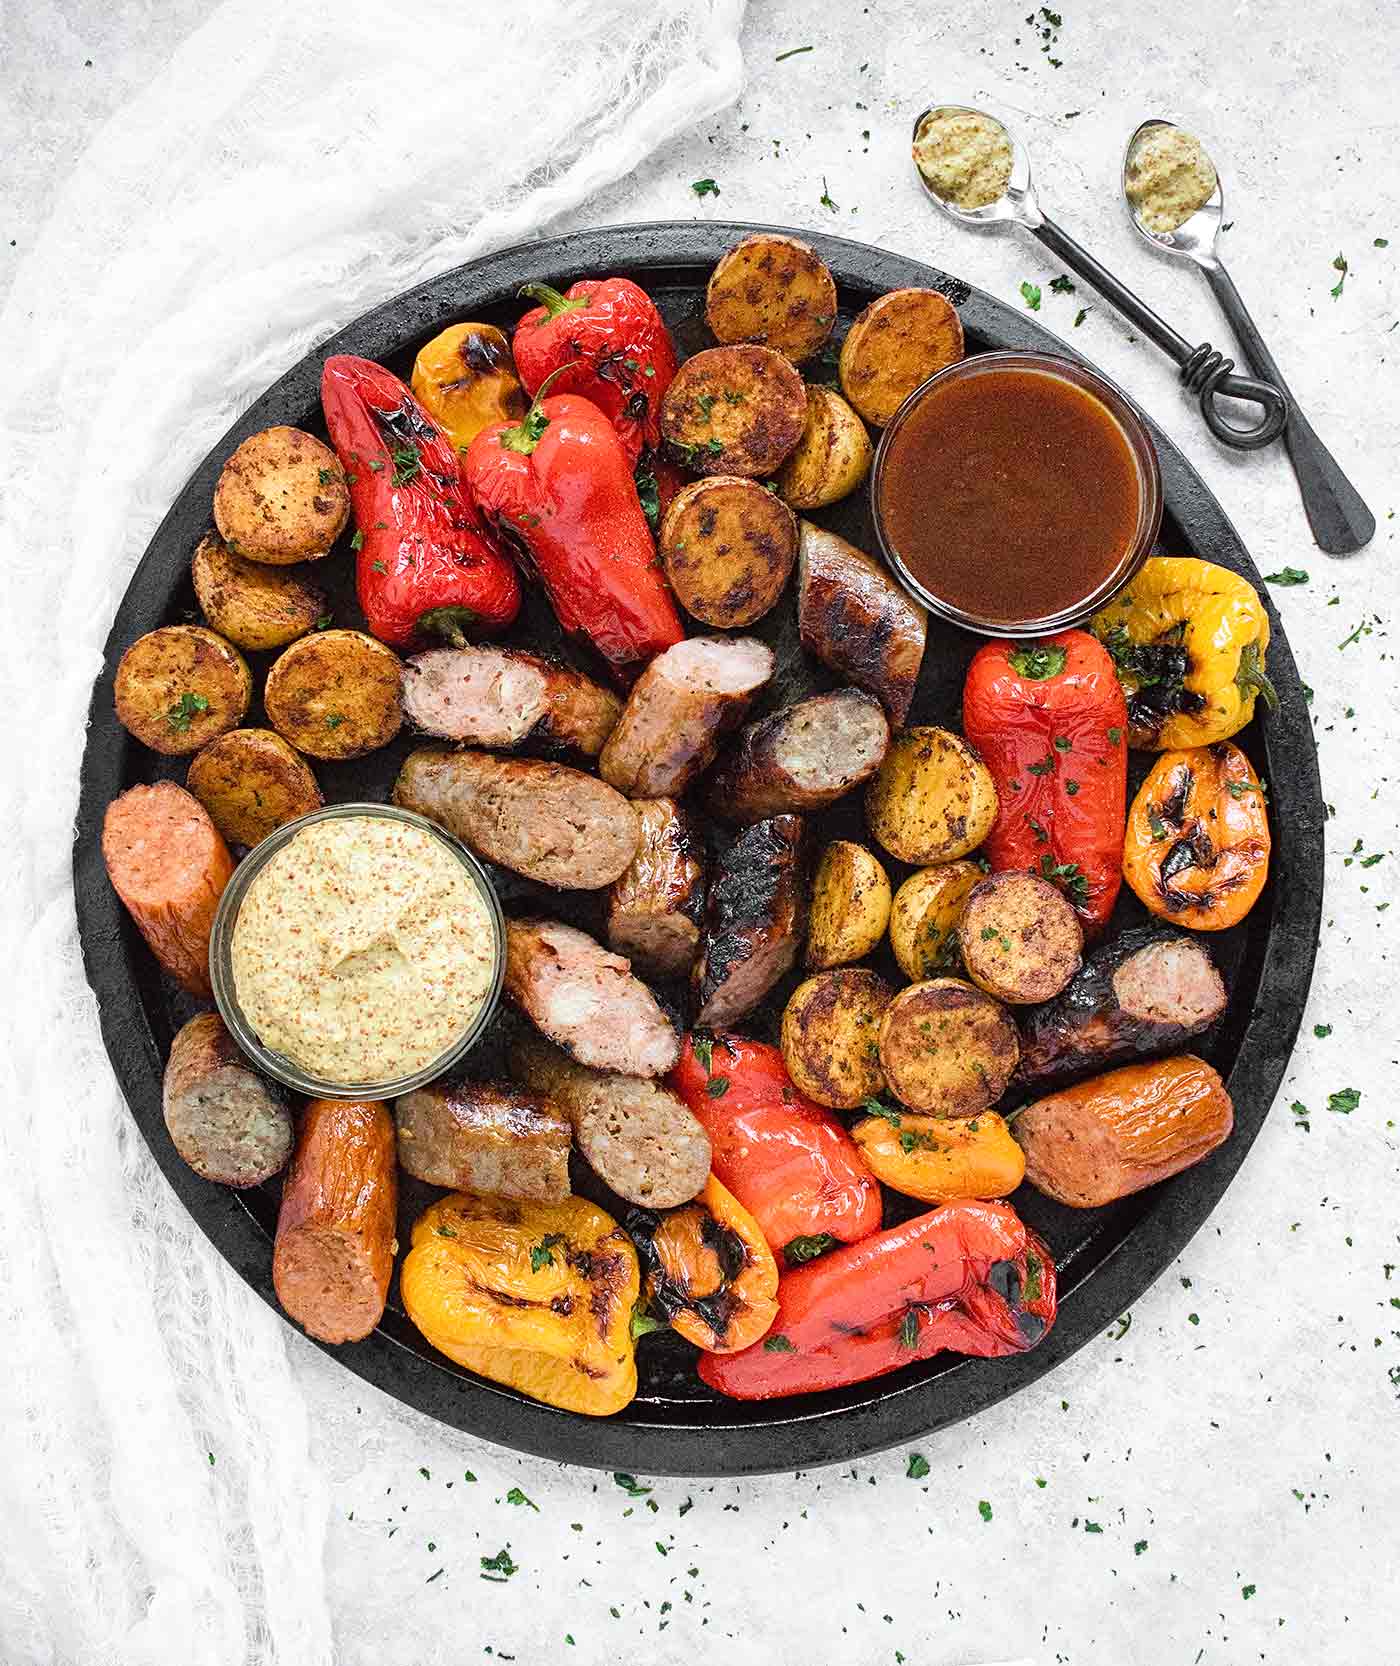 Grilled Sausages, Peppers & Potatoes with mustard and bbq dipping sauces